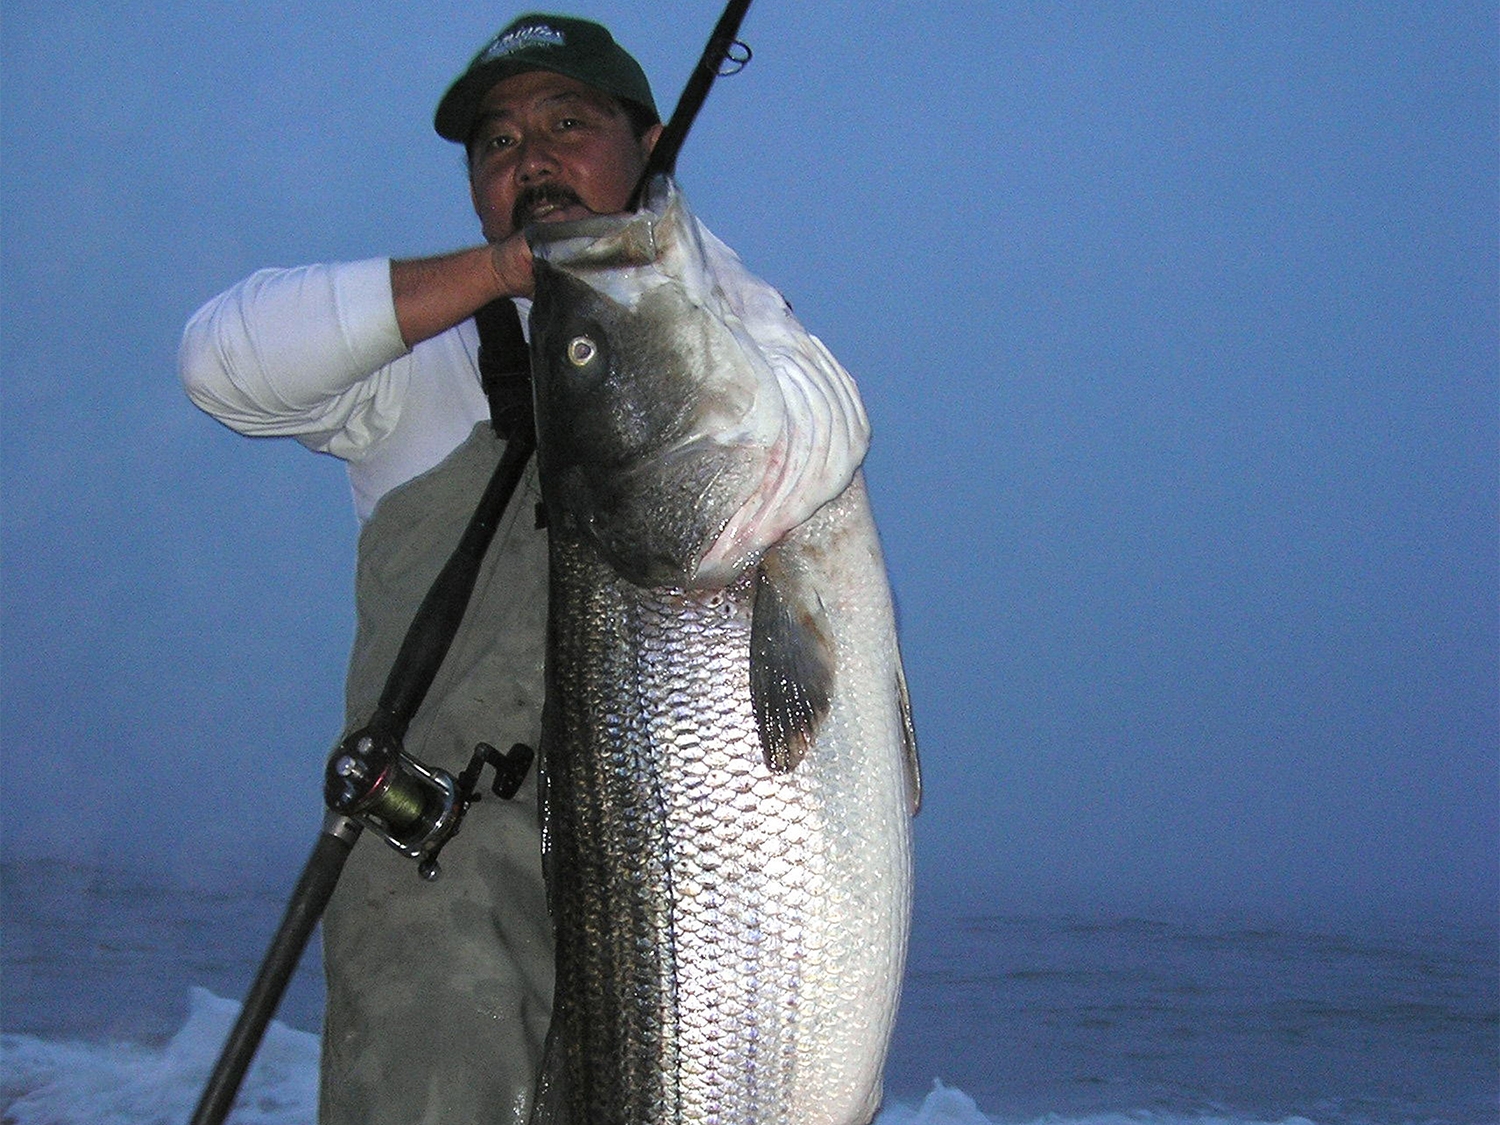 4 Live Fishing Bait Strategies for Summer Striped Bass